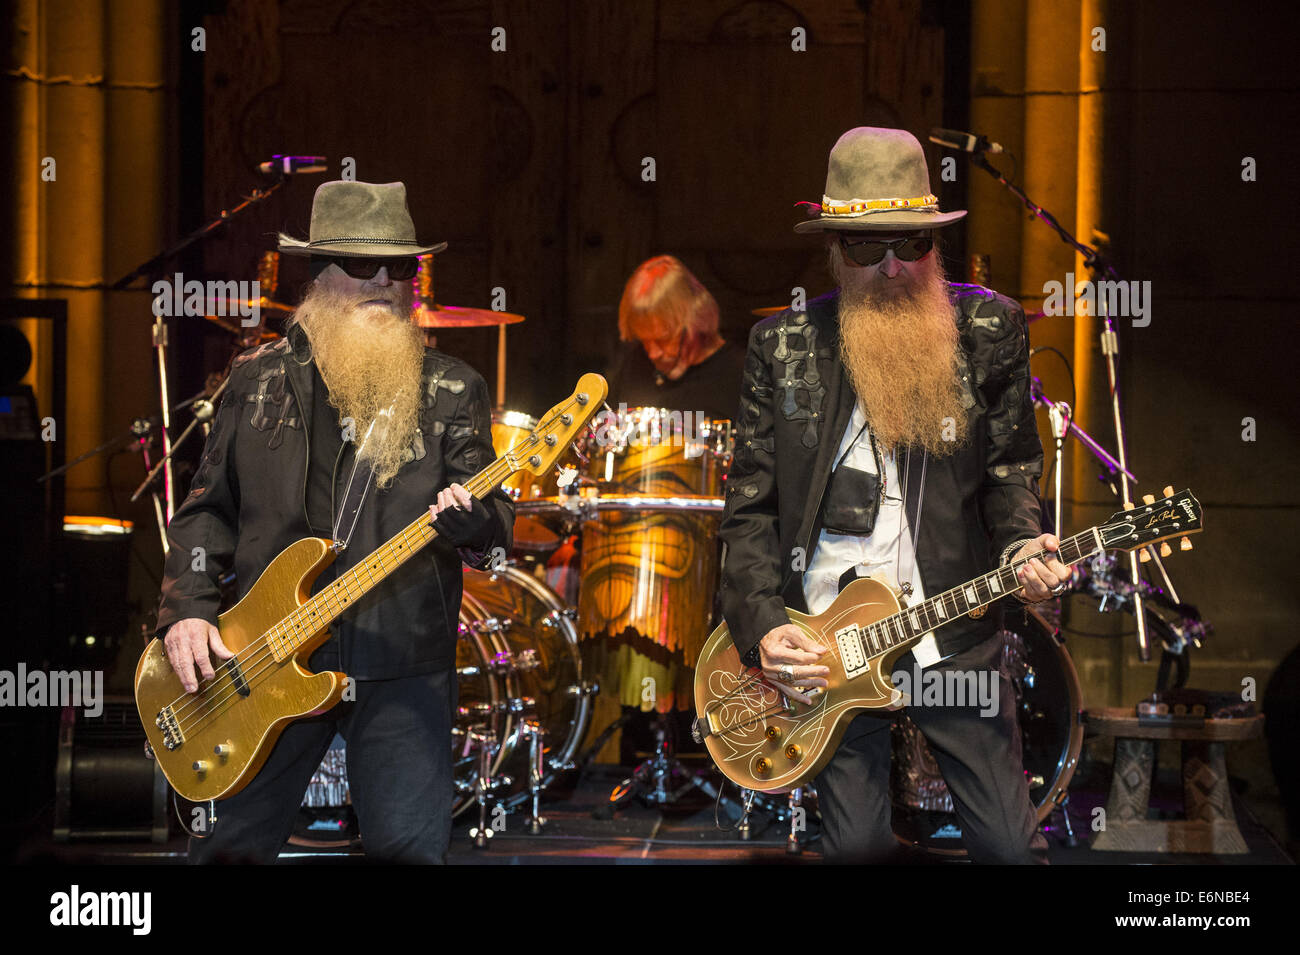 Aug 14, 2014. 14th Aug, 2014. Saratoga, California, USA - Dusty Hill, Frank Beard and Billy Gibbons of ZZ Top perform live at the sold-out Mountain Winery. © Jerome Brunet/ZUMA Wire/Alamy Live News Stock Photo